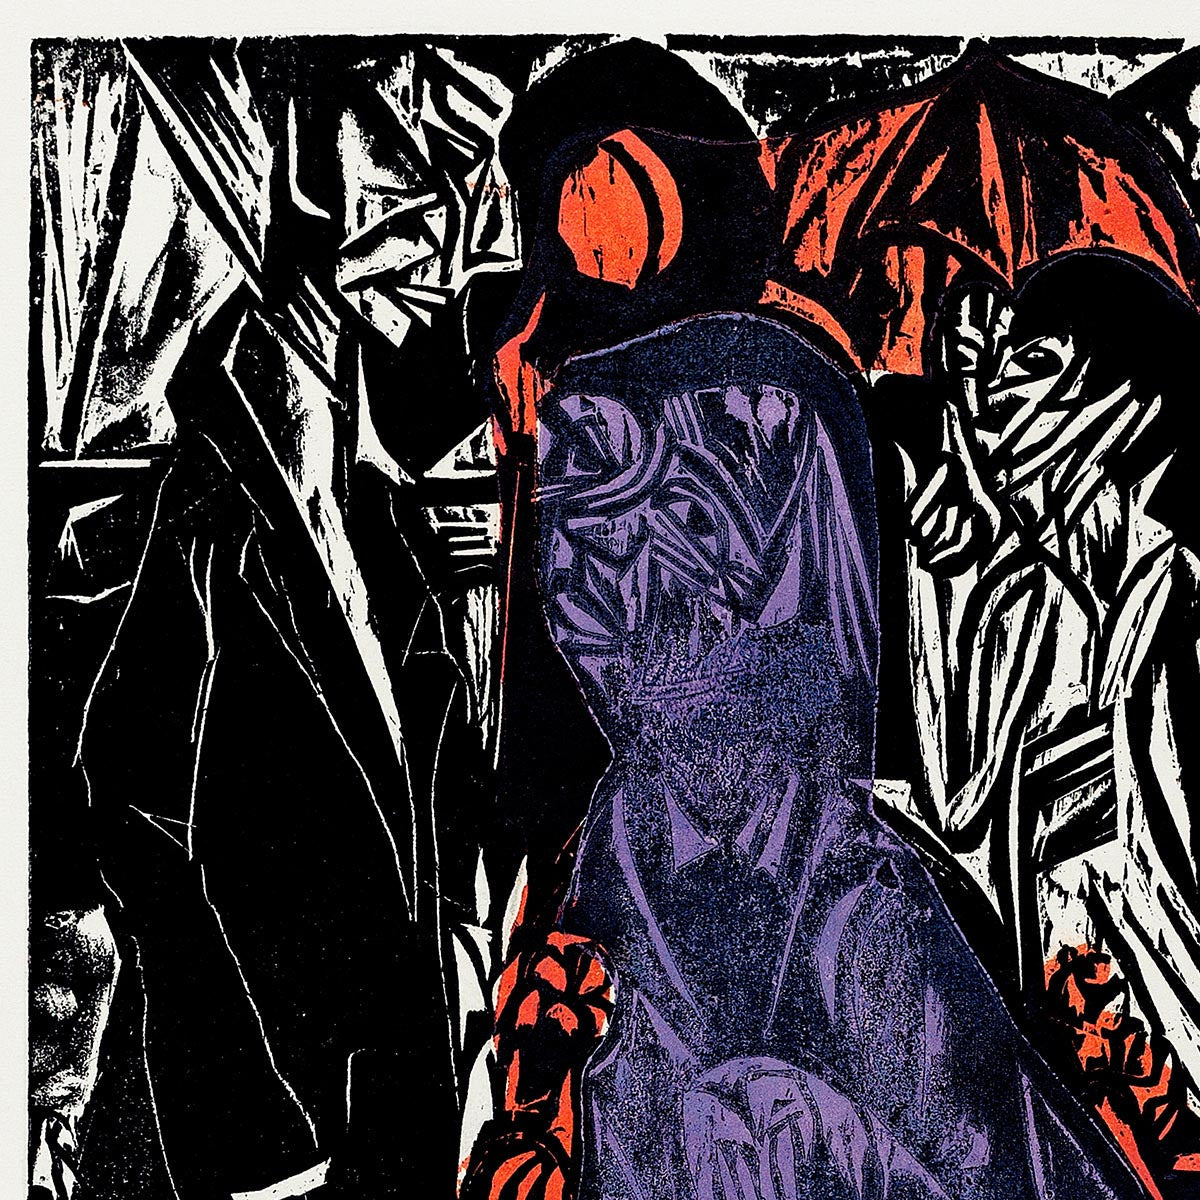 The Sale of His Shadow by Ernst Kirchner